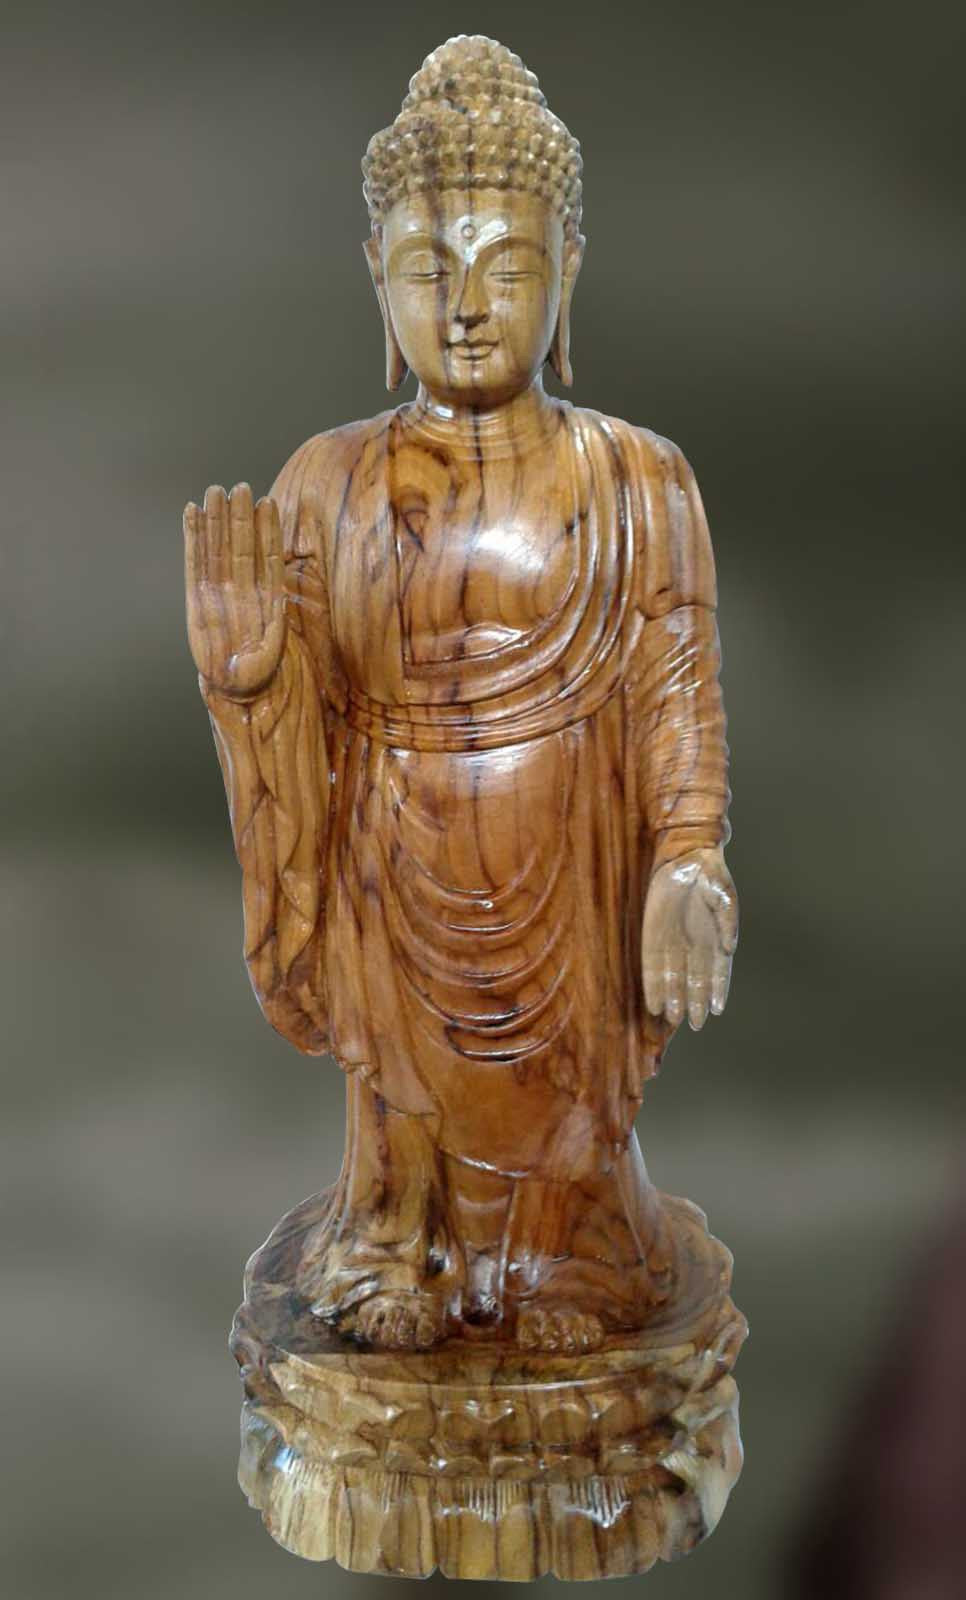 Laughing Buddha Figurine Statue Meaning & Symbolism